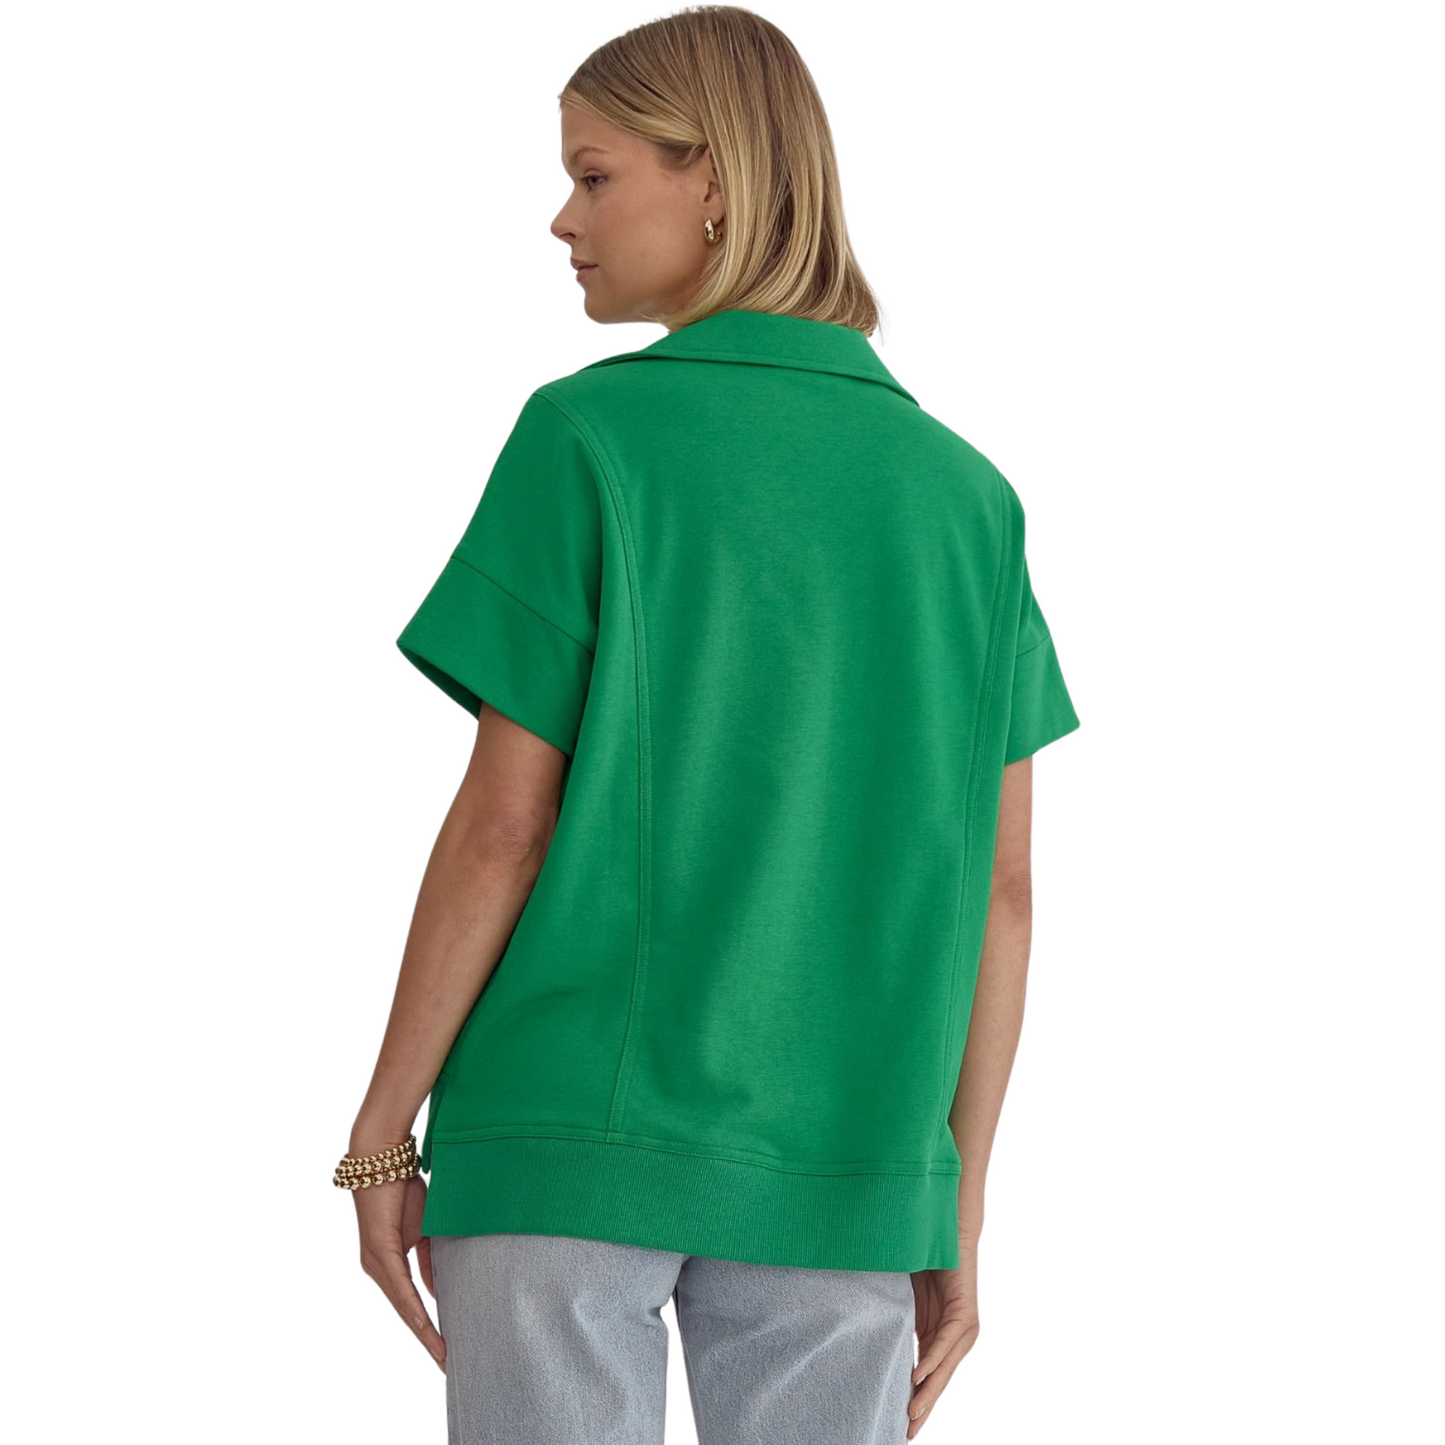 This solid short sleeve v-neck collared top is the perfect addition to your wardrobe. The split at the side hem adds a modern touch while the lightweight and non-sheer fabric ensures comfort and versatility. Complete your look with this essential piece.